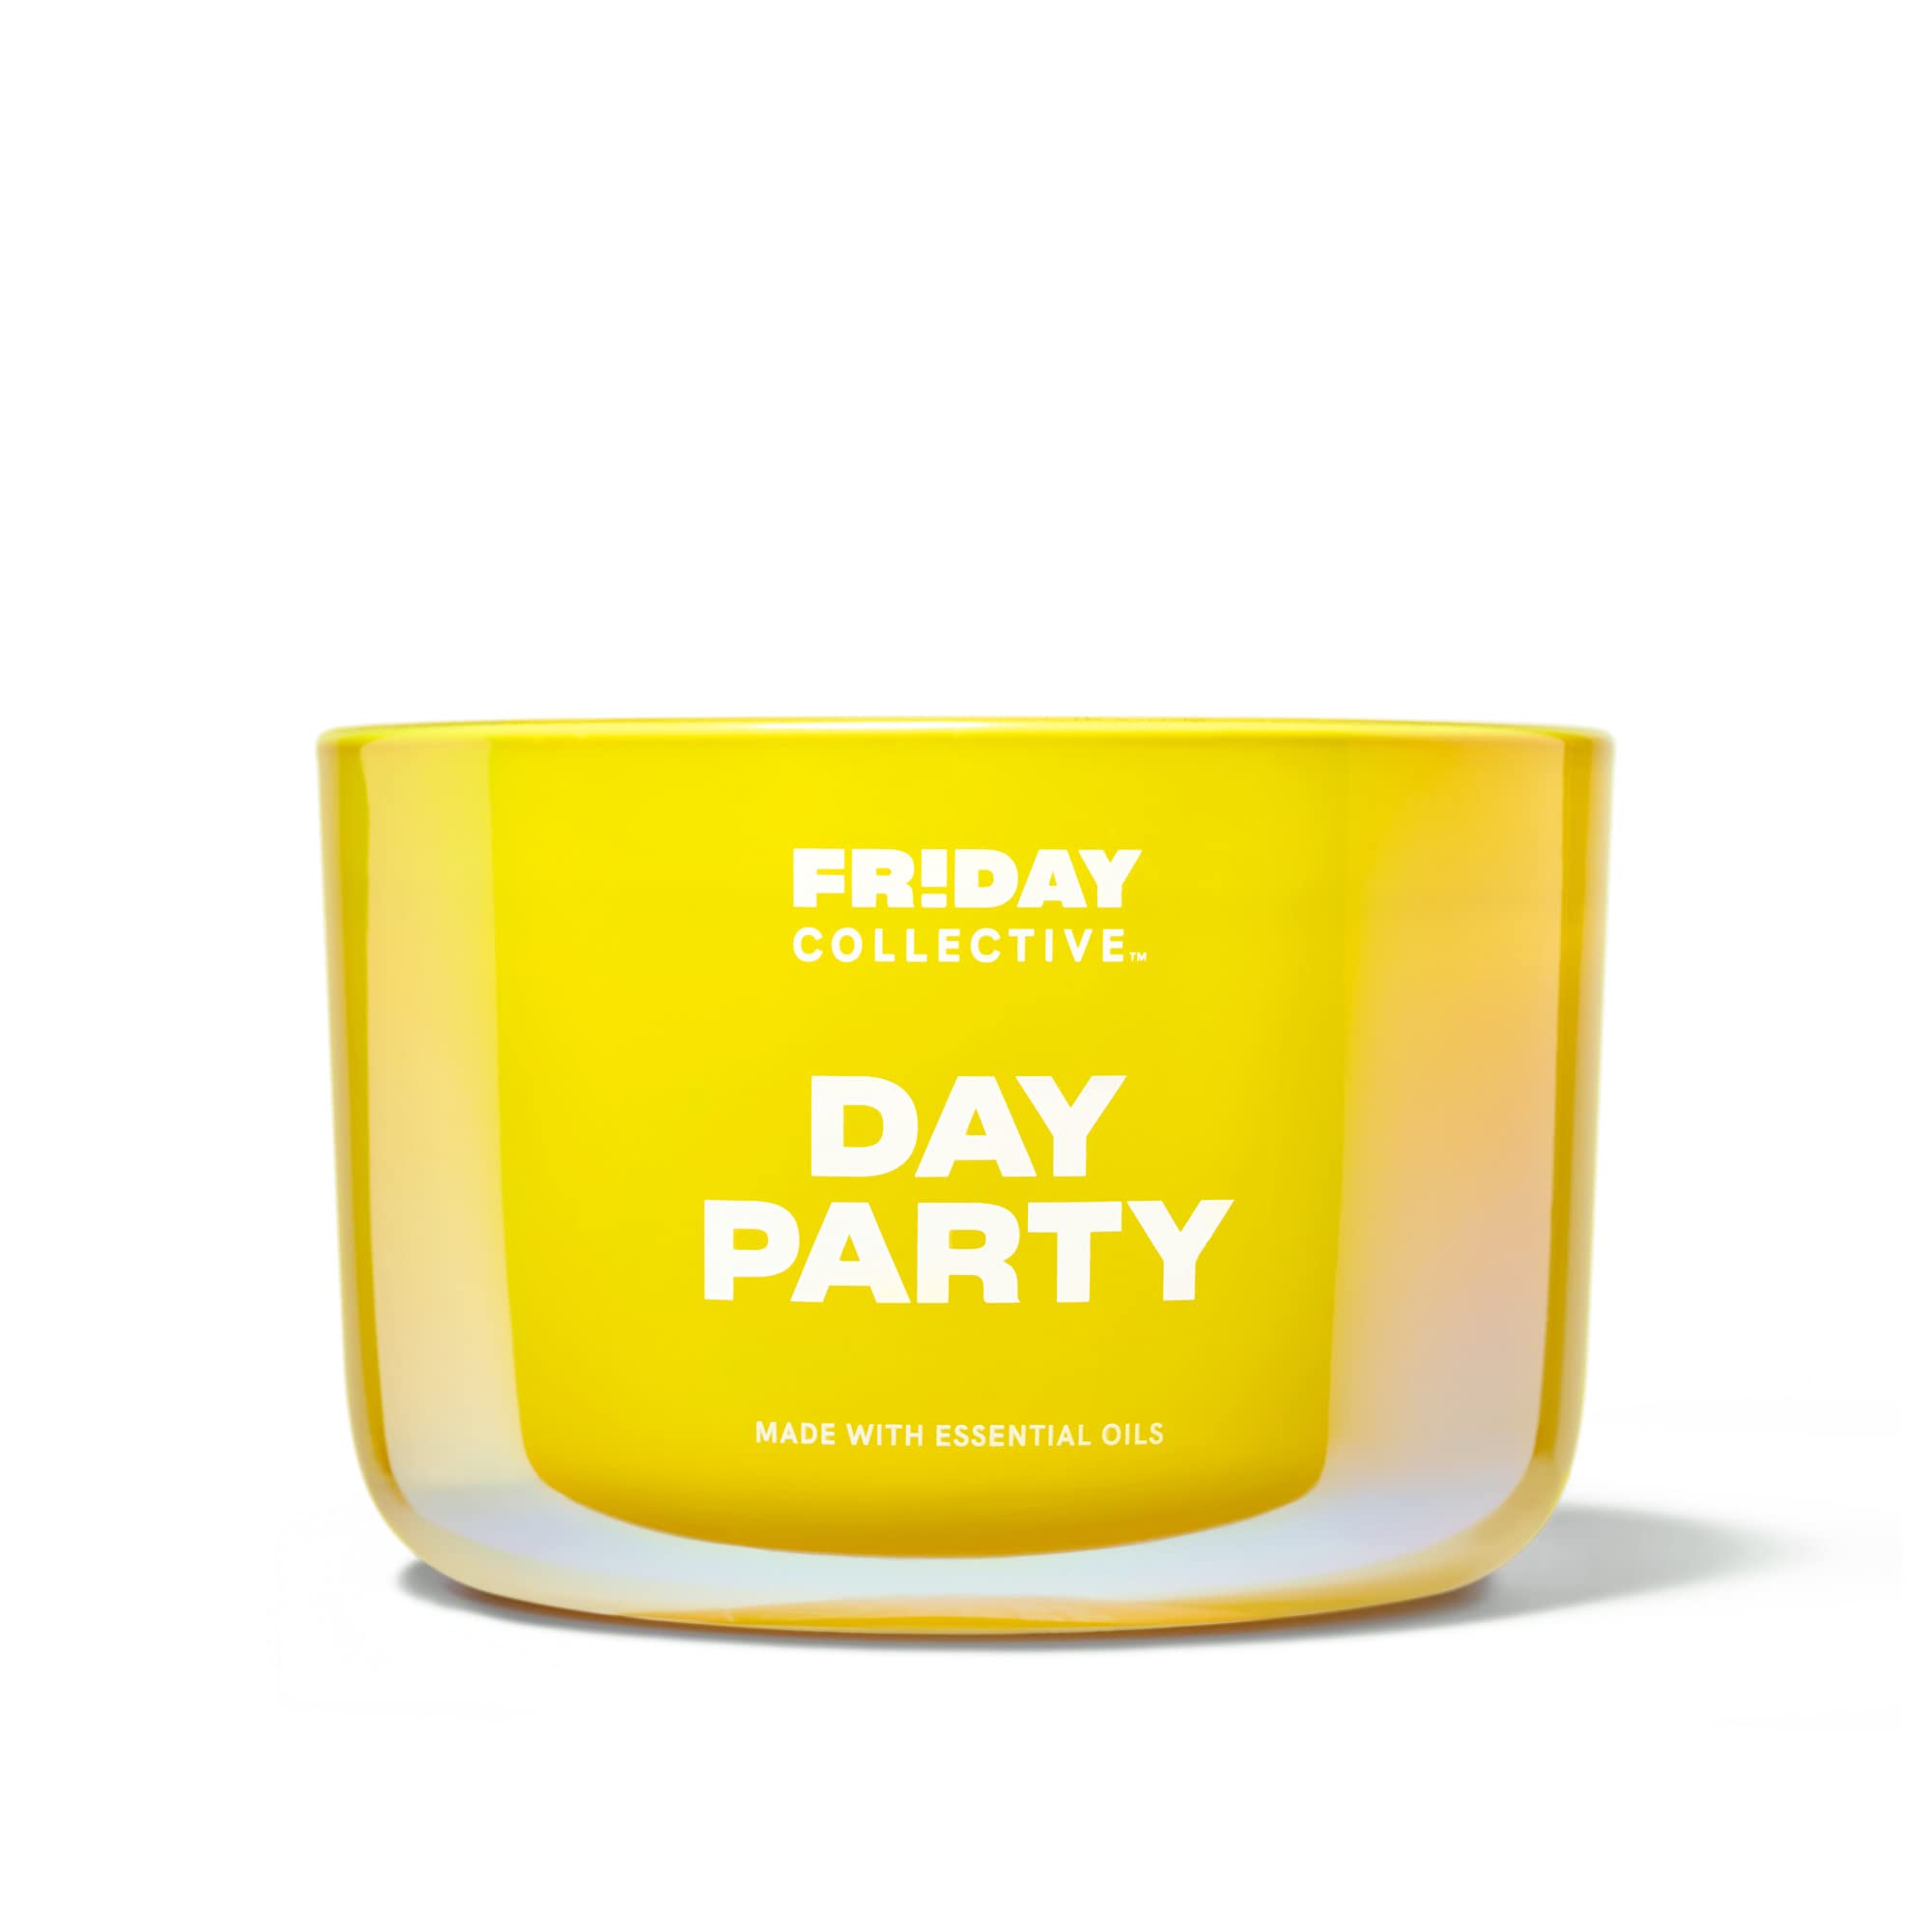 Friday Collective Day Party Candle, Citrus Scented, Made with Essential Oils, 3 Wicks, 13.5 oz